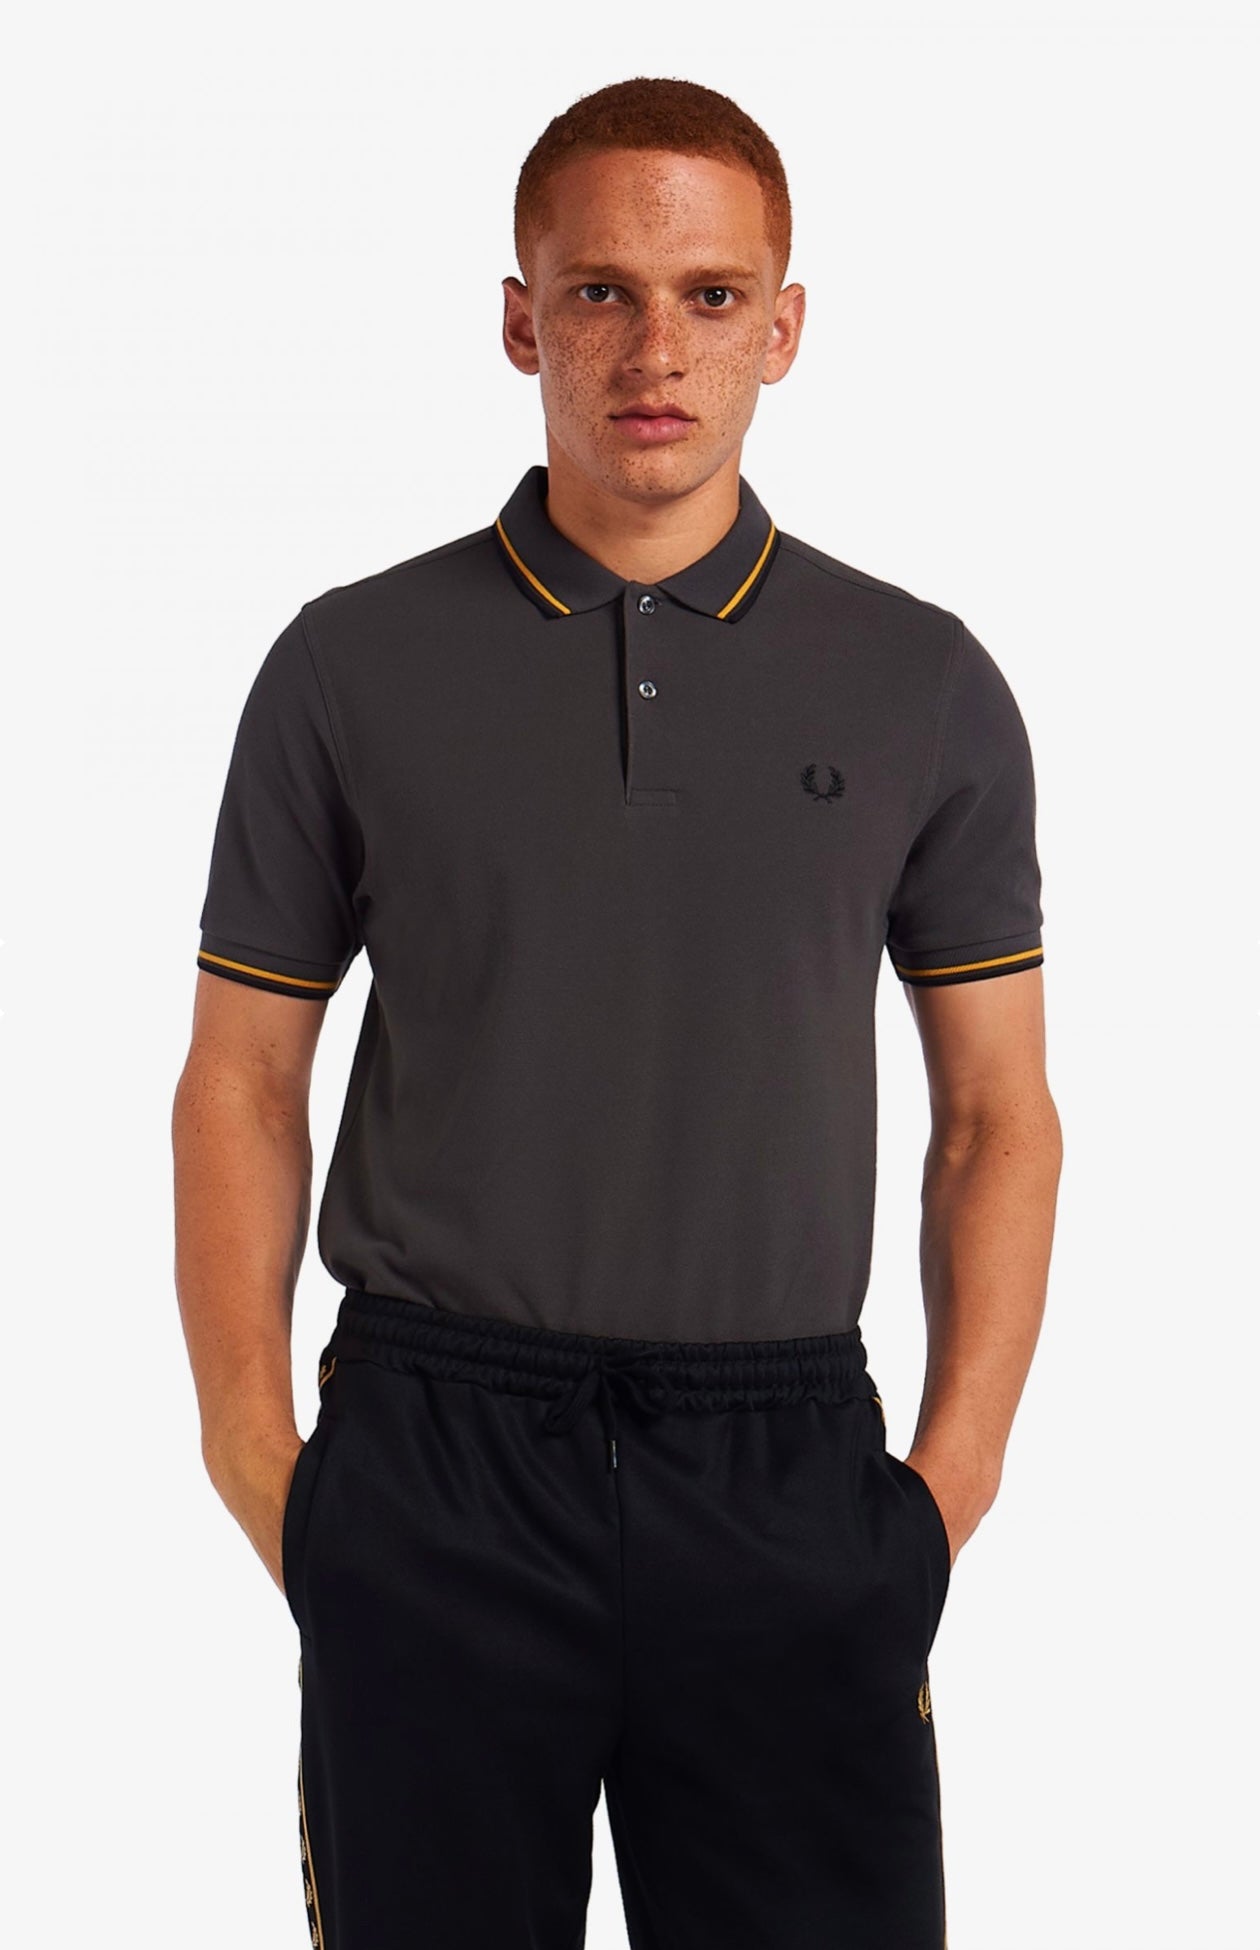 Twin Tipped Fred Perry Shirts (7 polos)